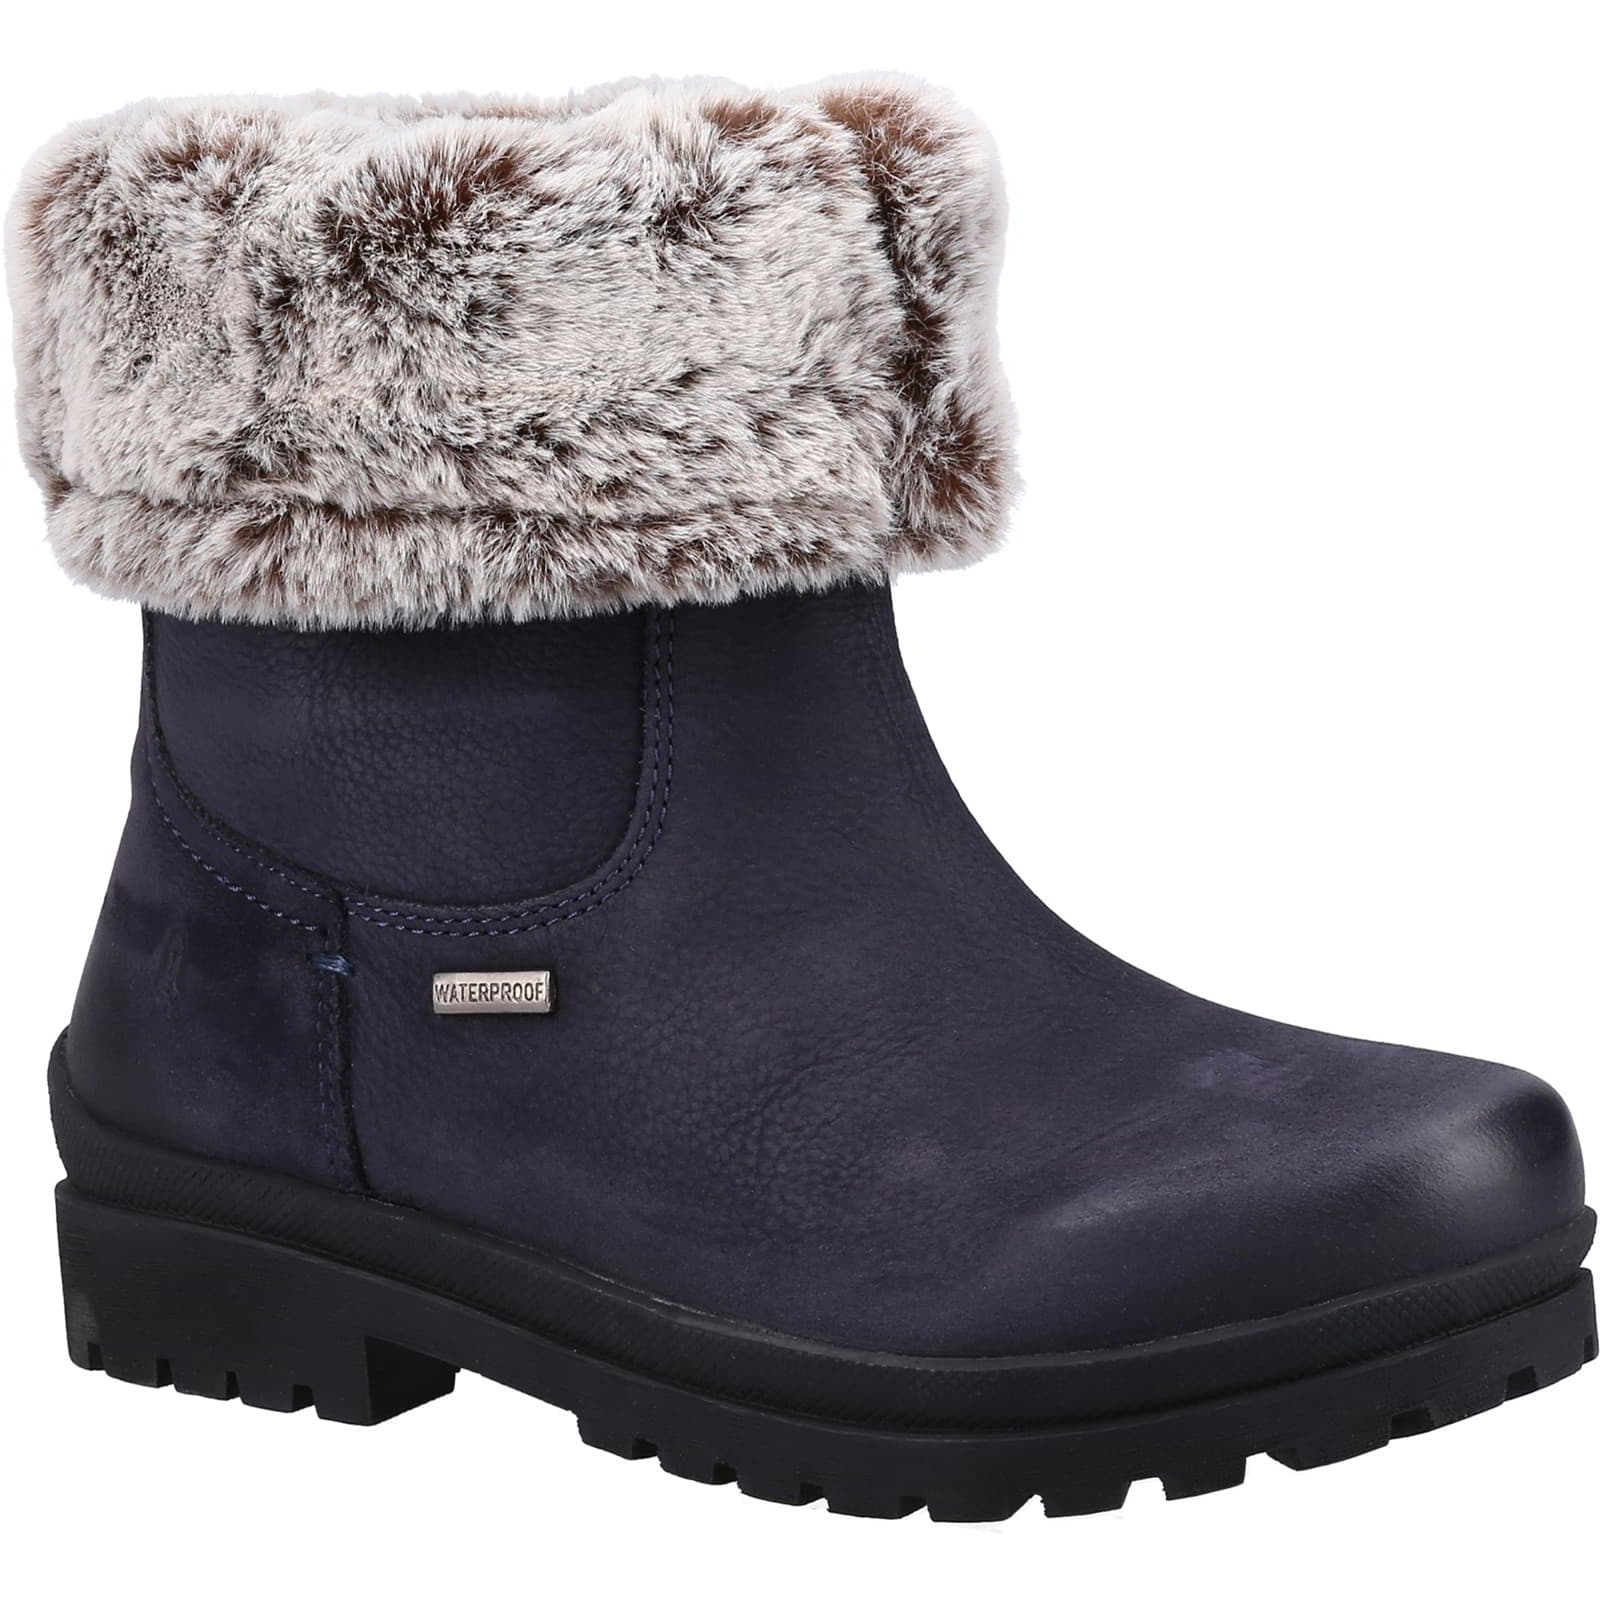 Hush Puppies Women's Alice Pull On Warm Lined Waterproof Boots - UK 3